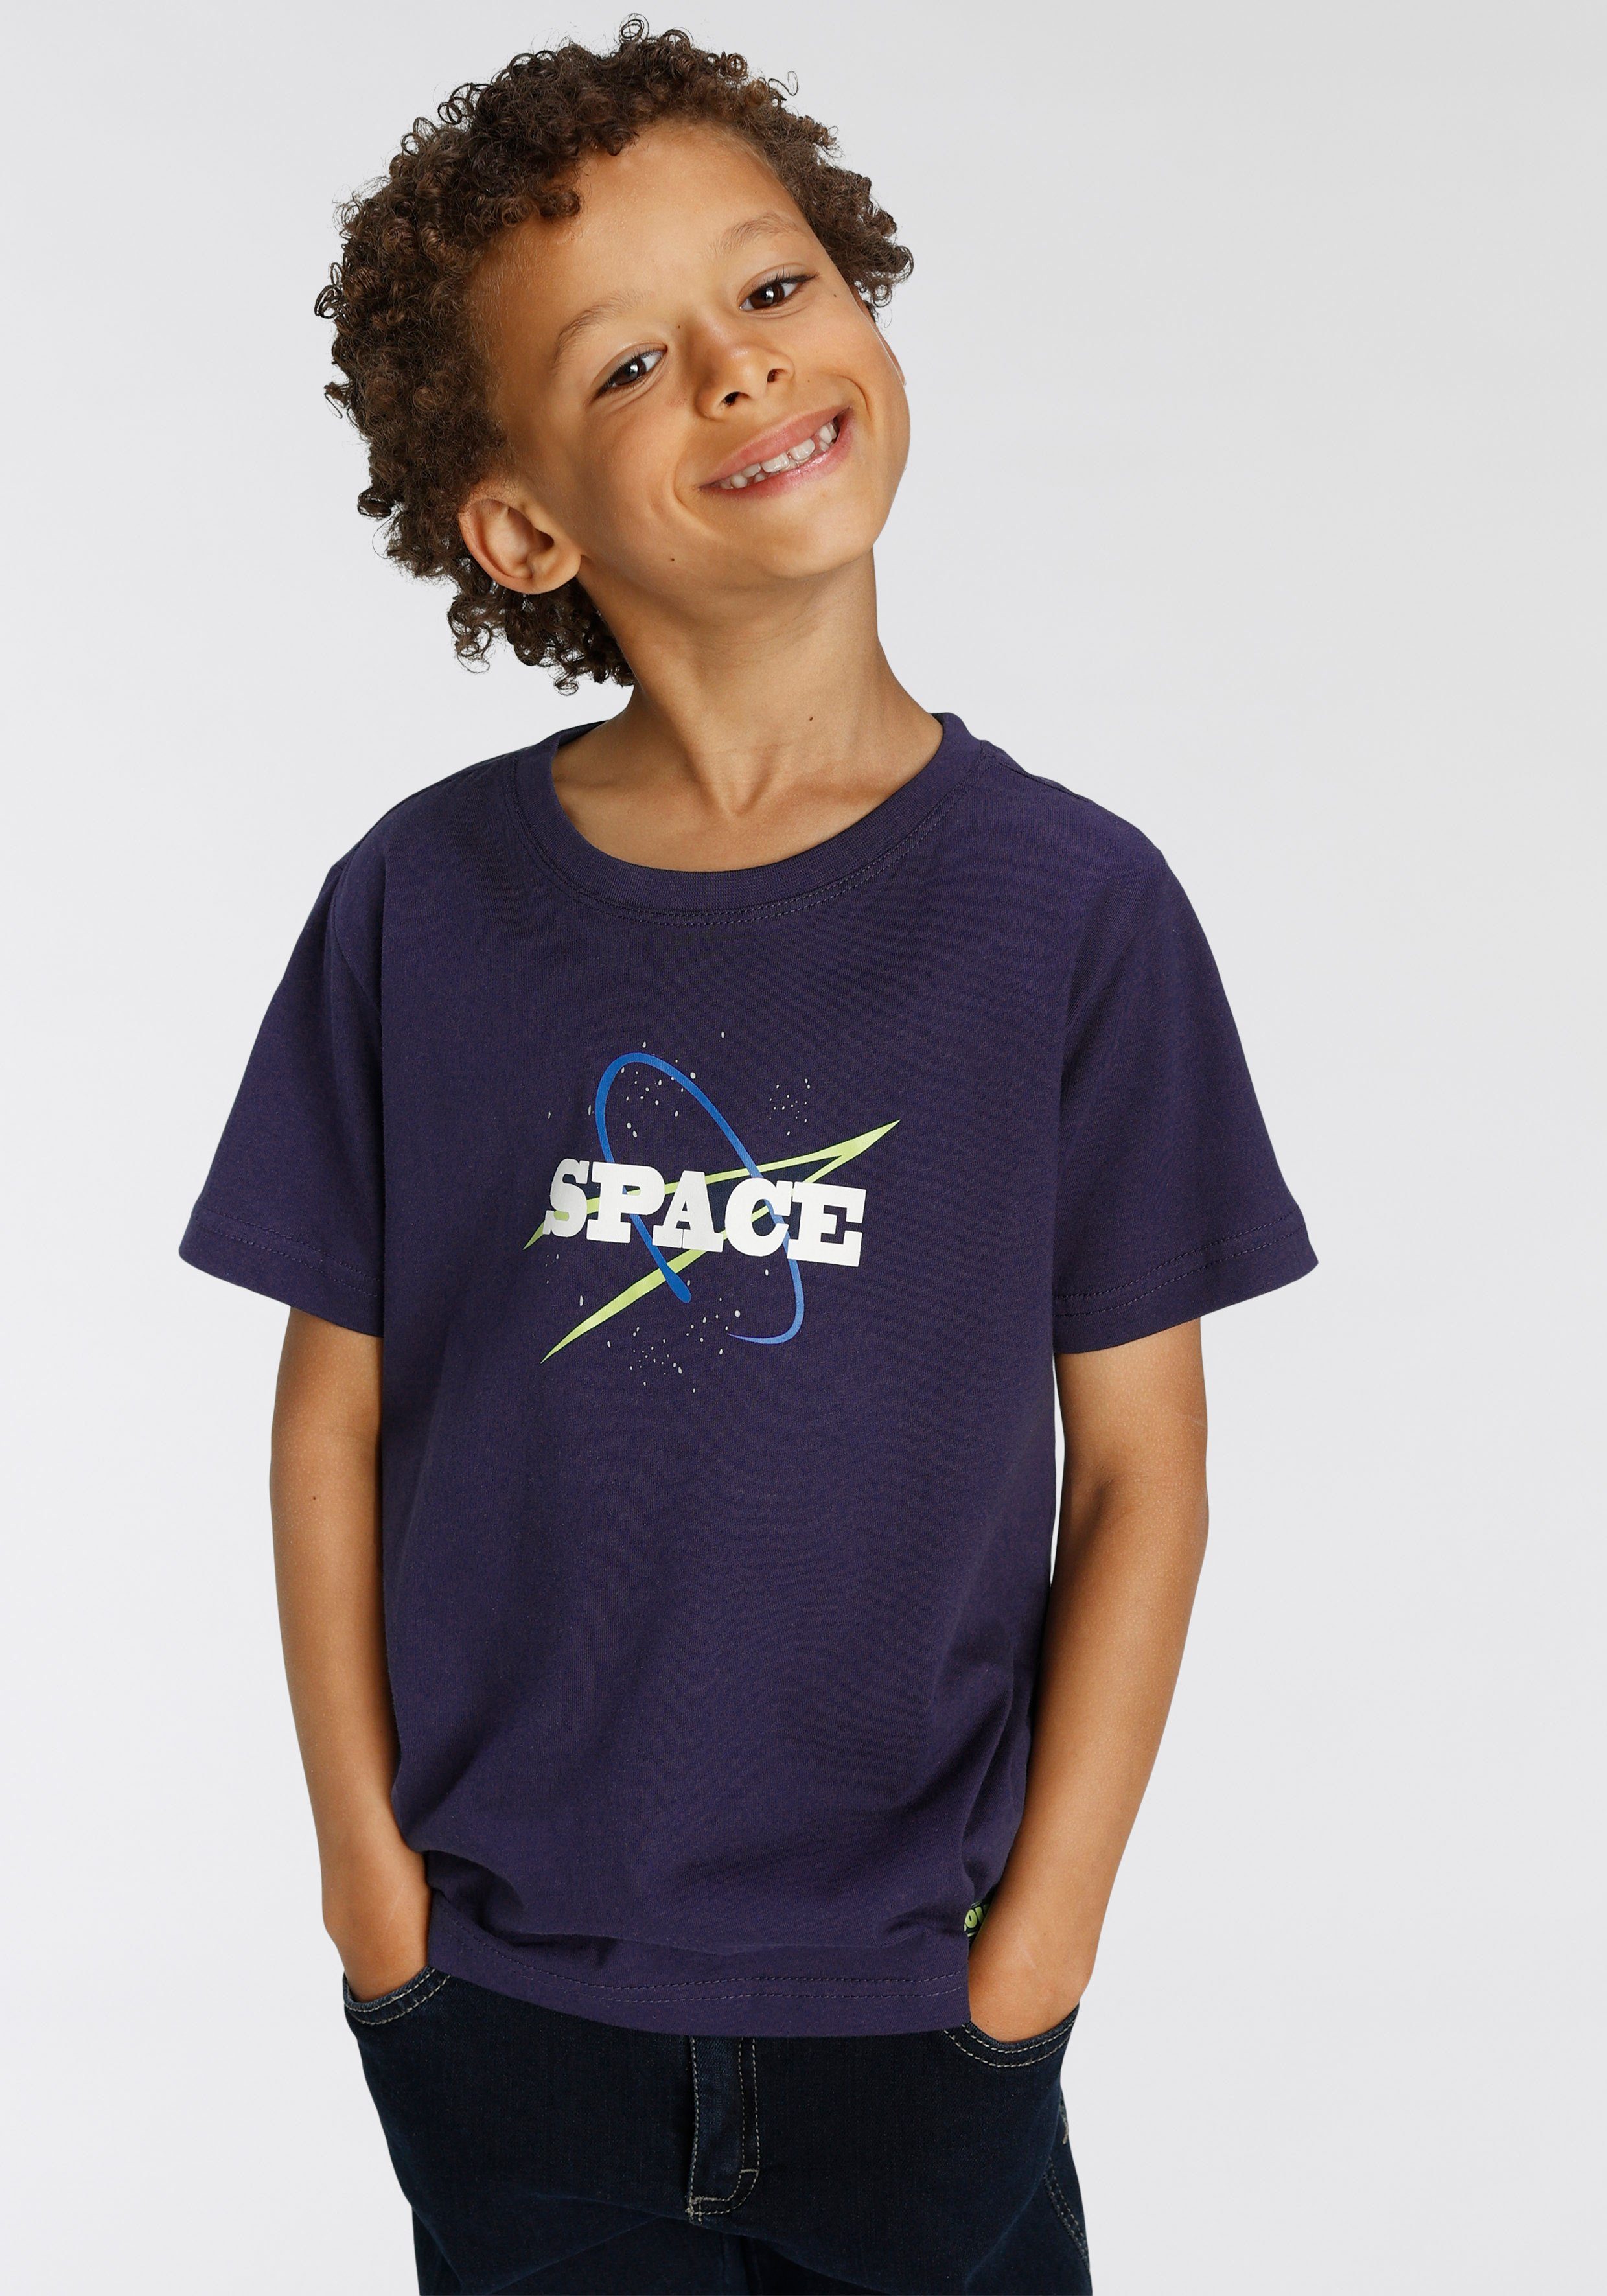 aus SPACE Bio-Baumwolle (Packung, Scout T-Shirt 2er-Pack)